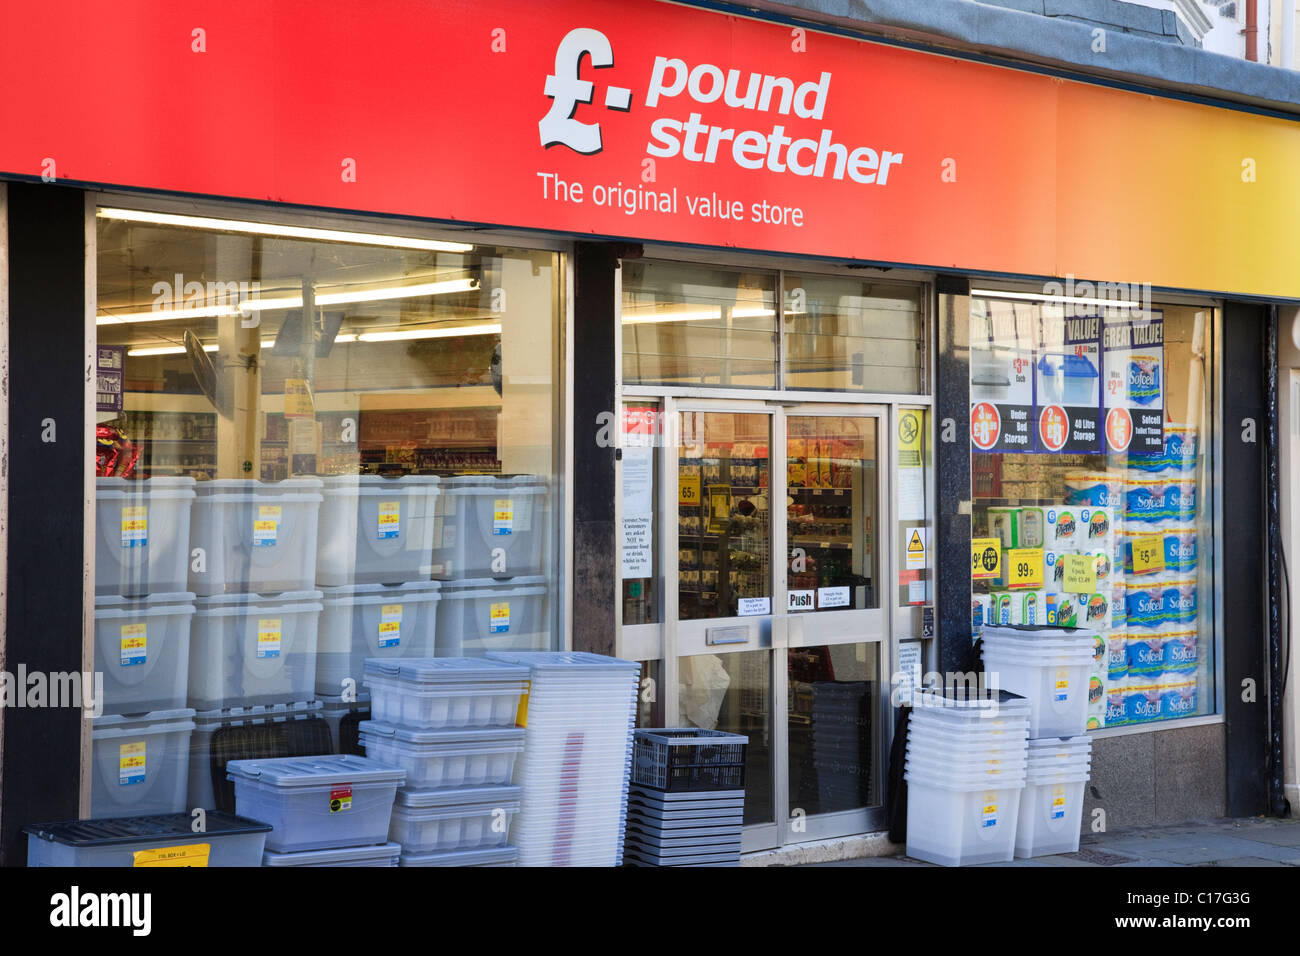 £ Pound Stretcher shop exterior with plastic storage containers for sale outside front window. Bangor, Gwynedd, North Wales, UK. Stock Photo